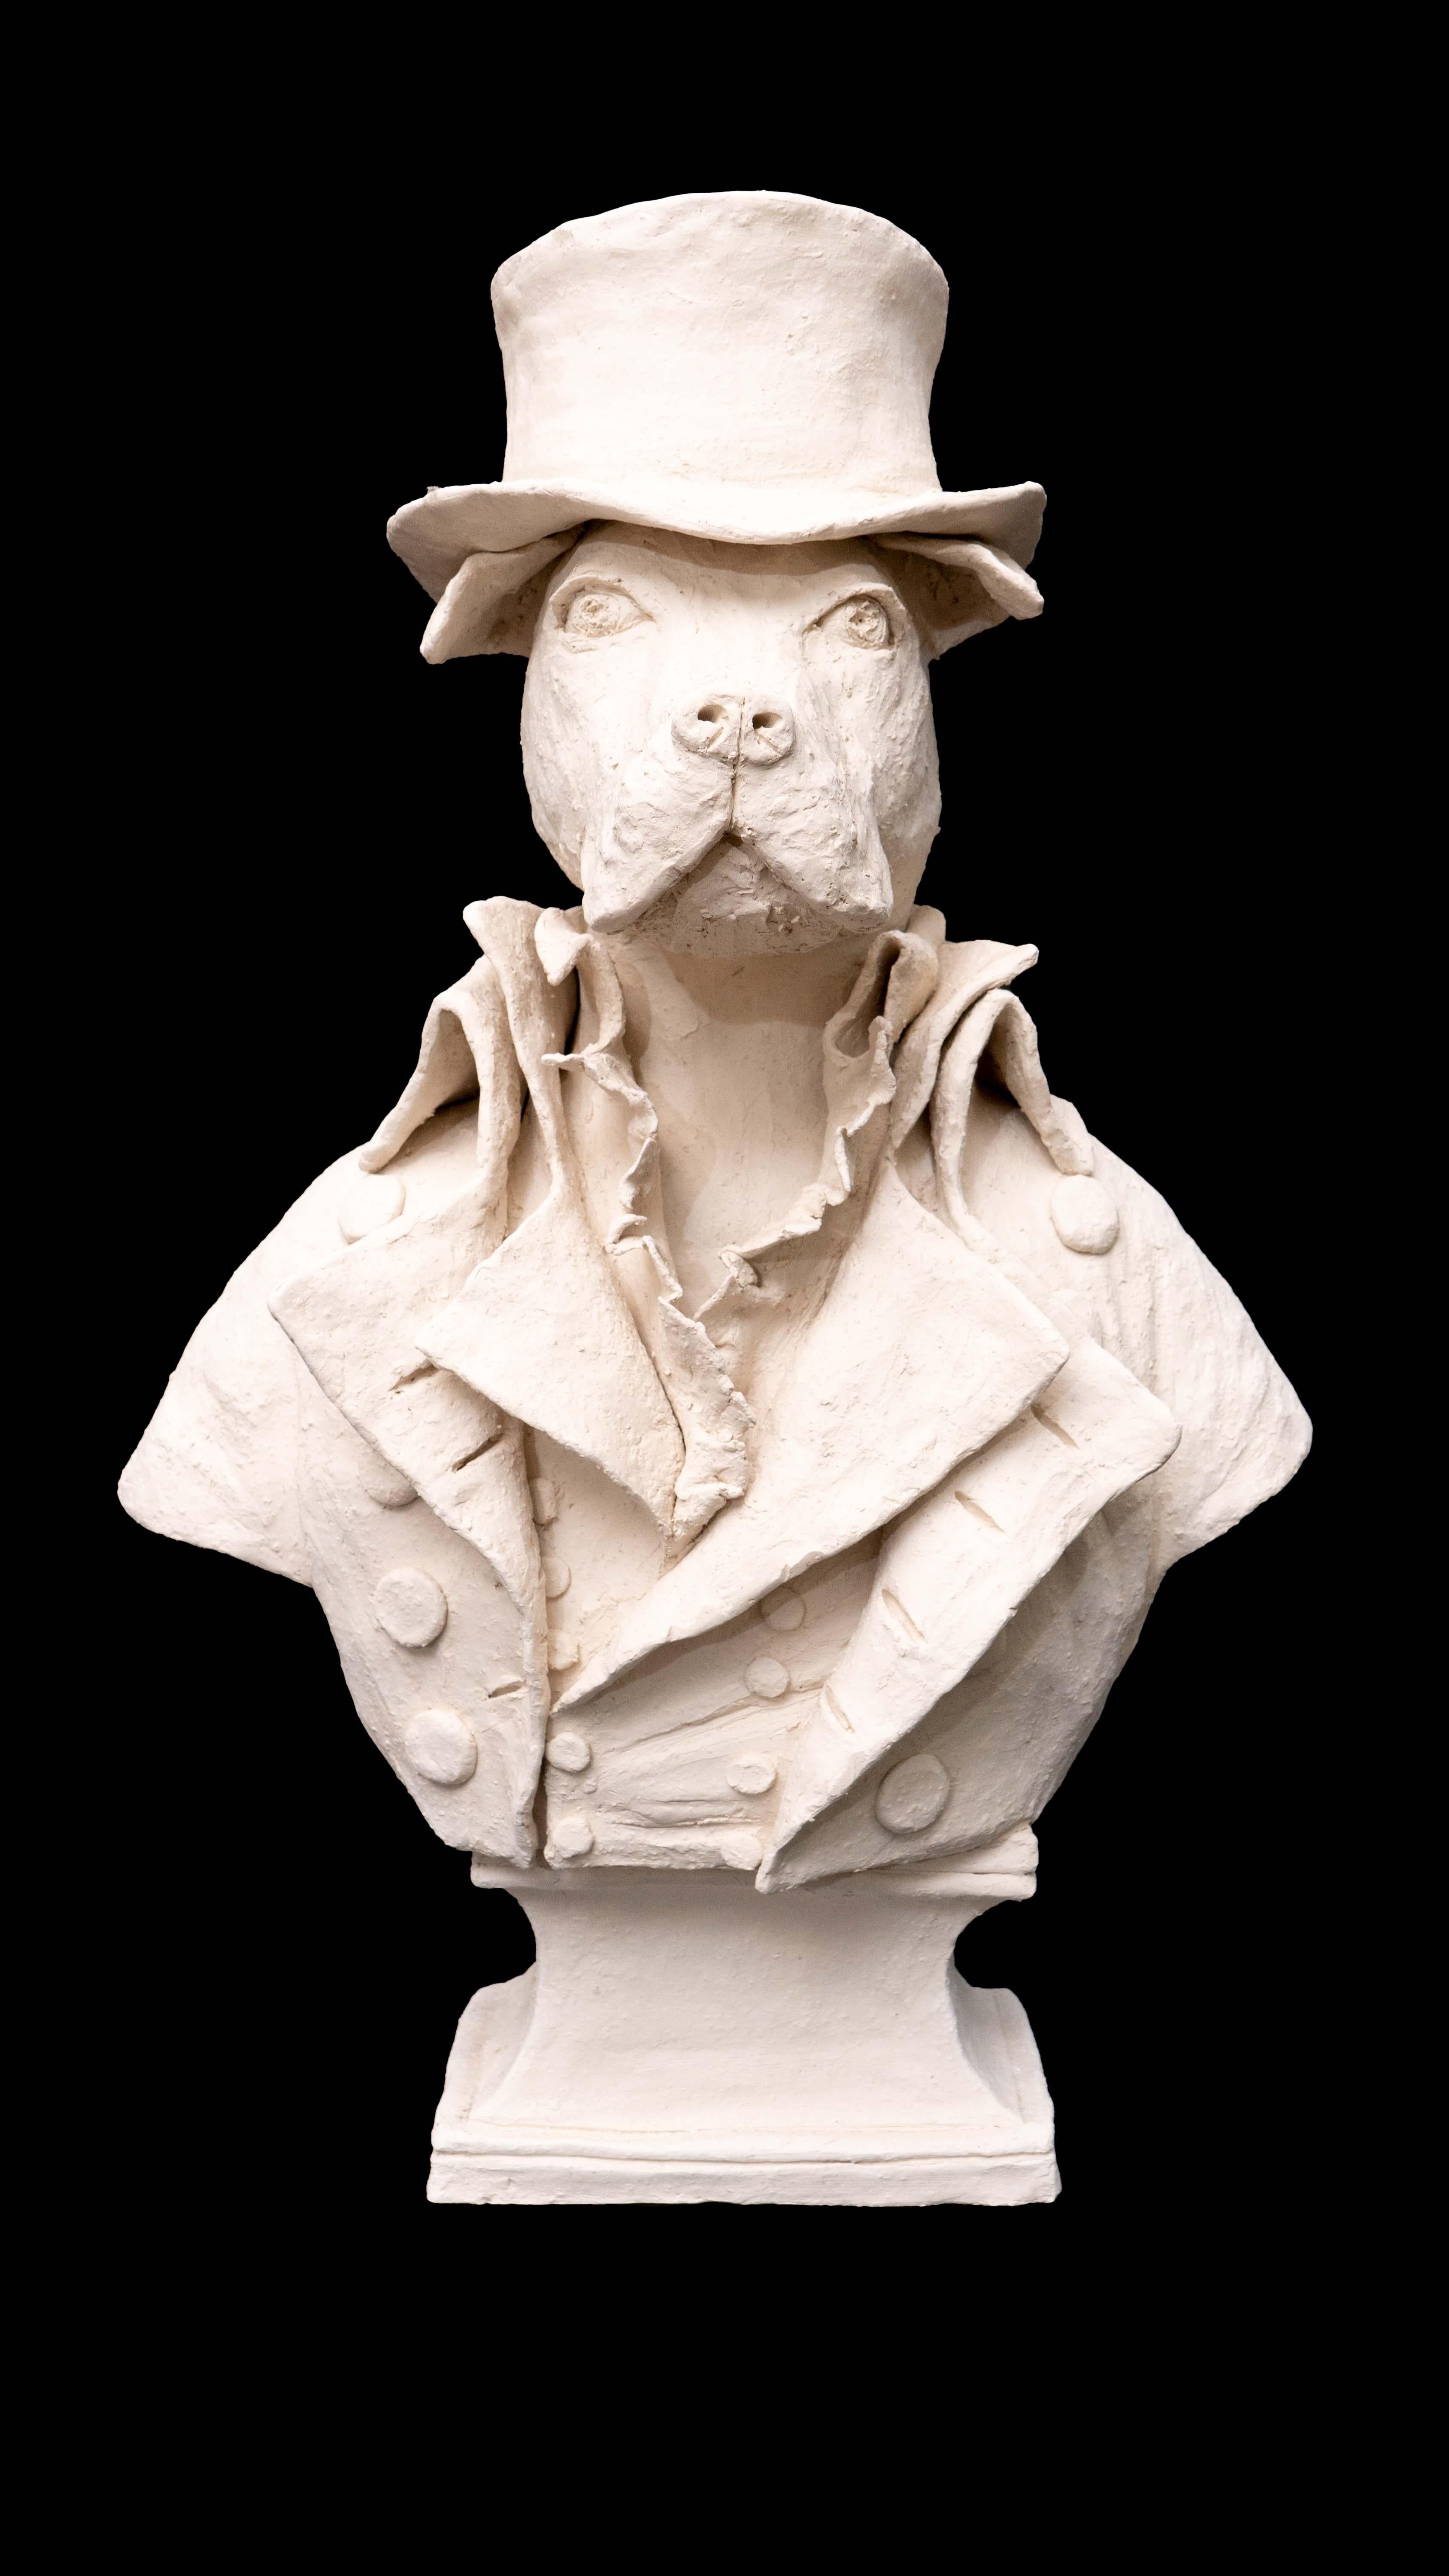 Terracotta anthropomorphic figure of a dog with top hat and 19th century costume by Laurence Lenglare

Measures 7